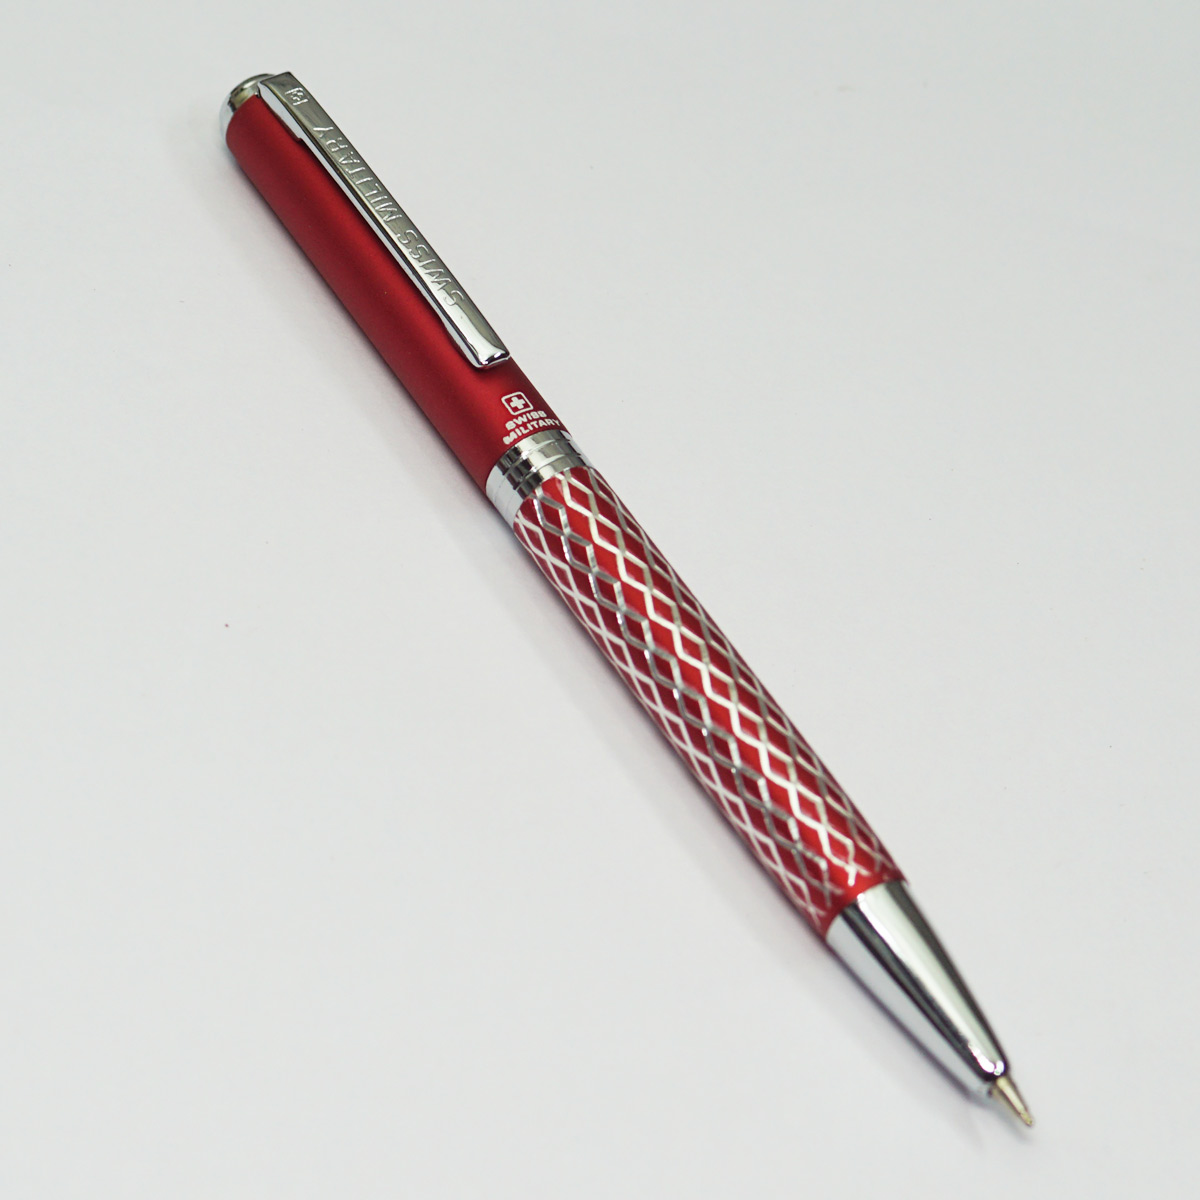 Swiss Military SM-28 Delta Mat Red Color X Design Body With Silver Trims 0.7mm Tip Twist Type Ball Pen SKU 23194